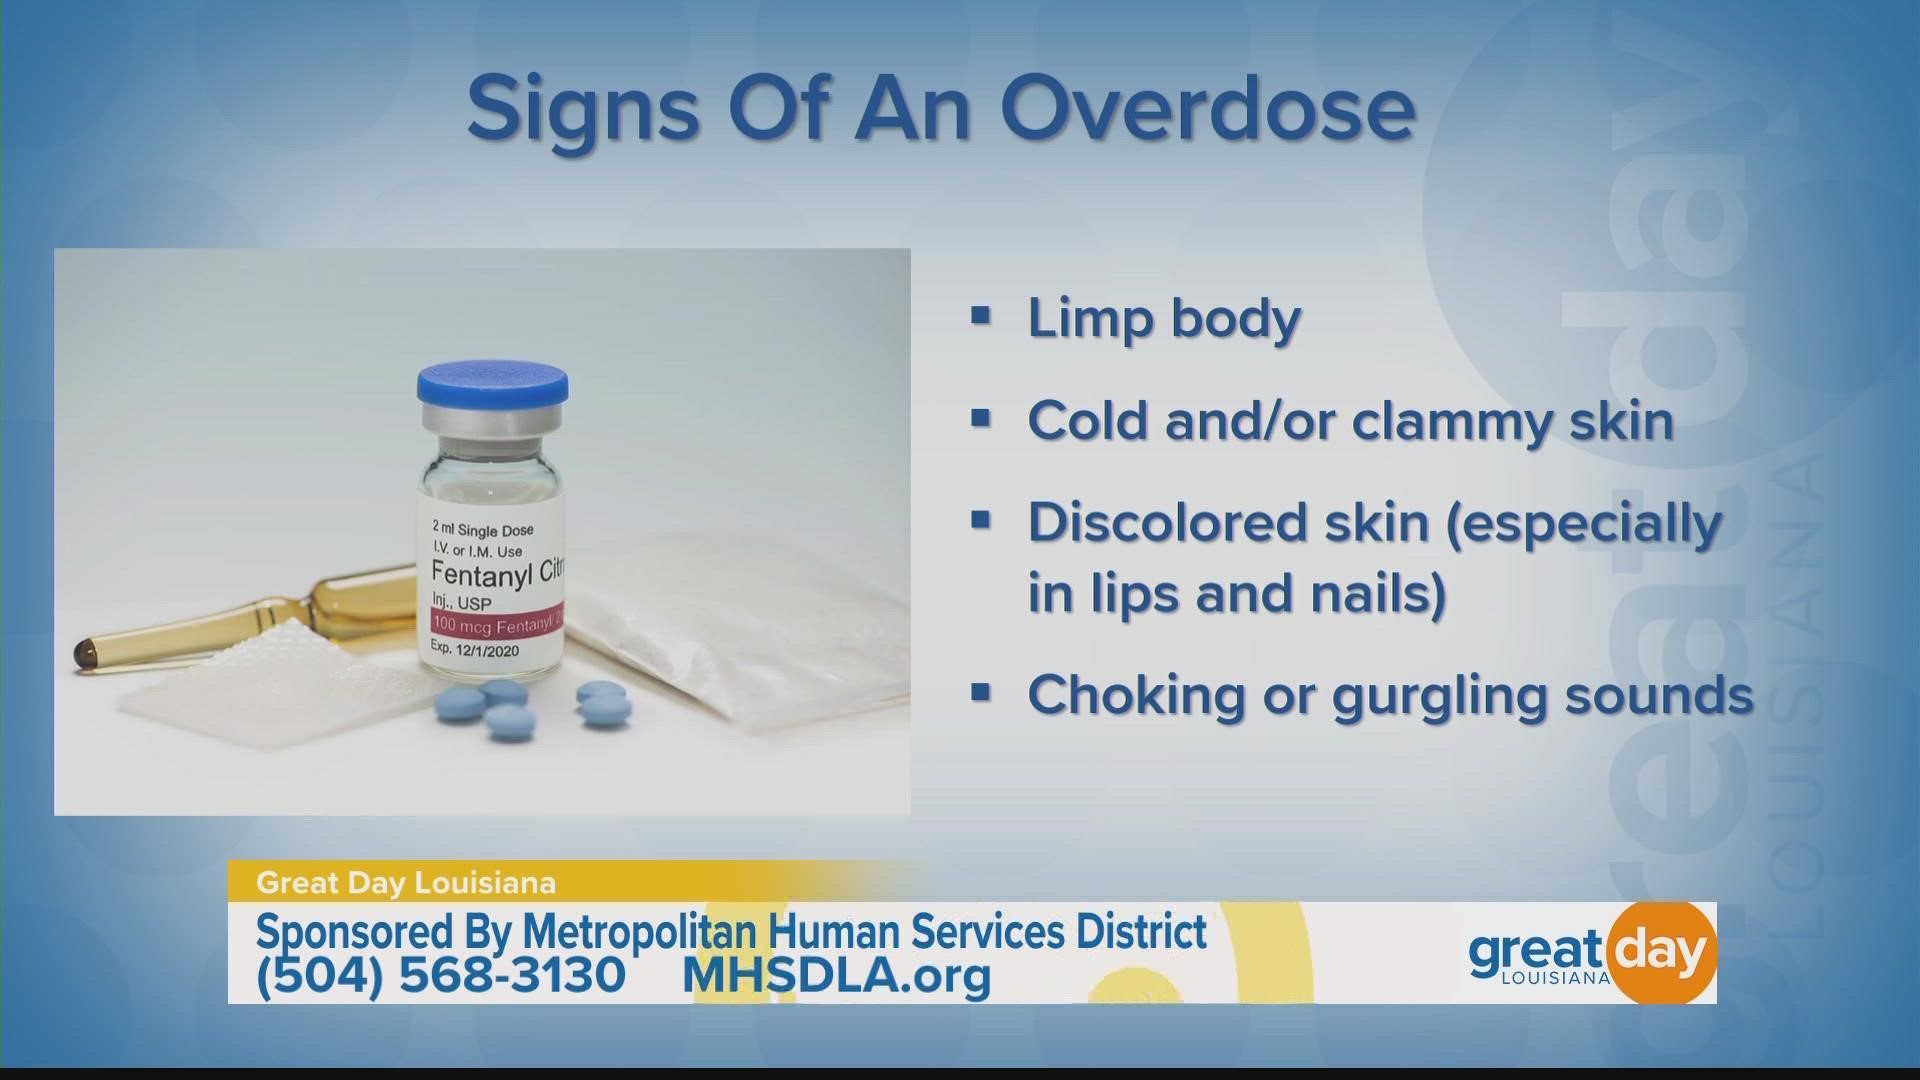 Our friends at MHSD share details on how to keep your family & friends safe despite growing concerns with overdoses in the community. Learn more at MHSDLA.org